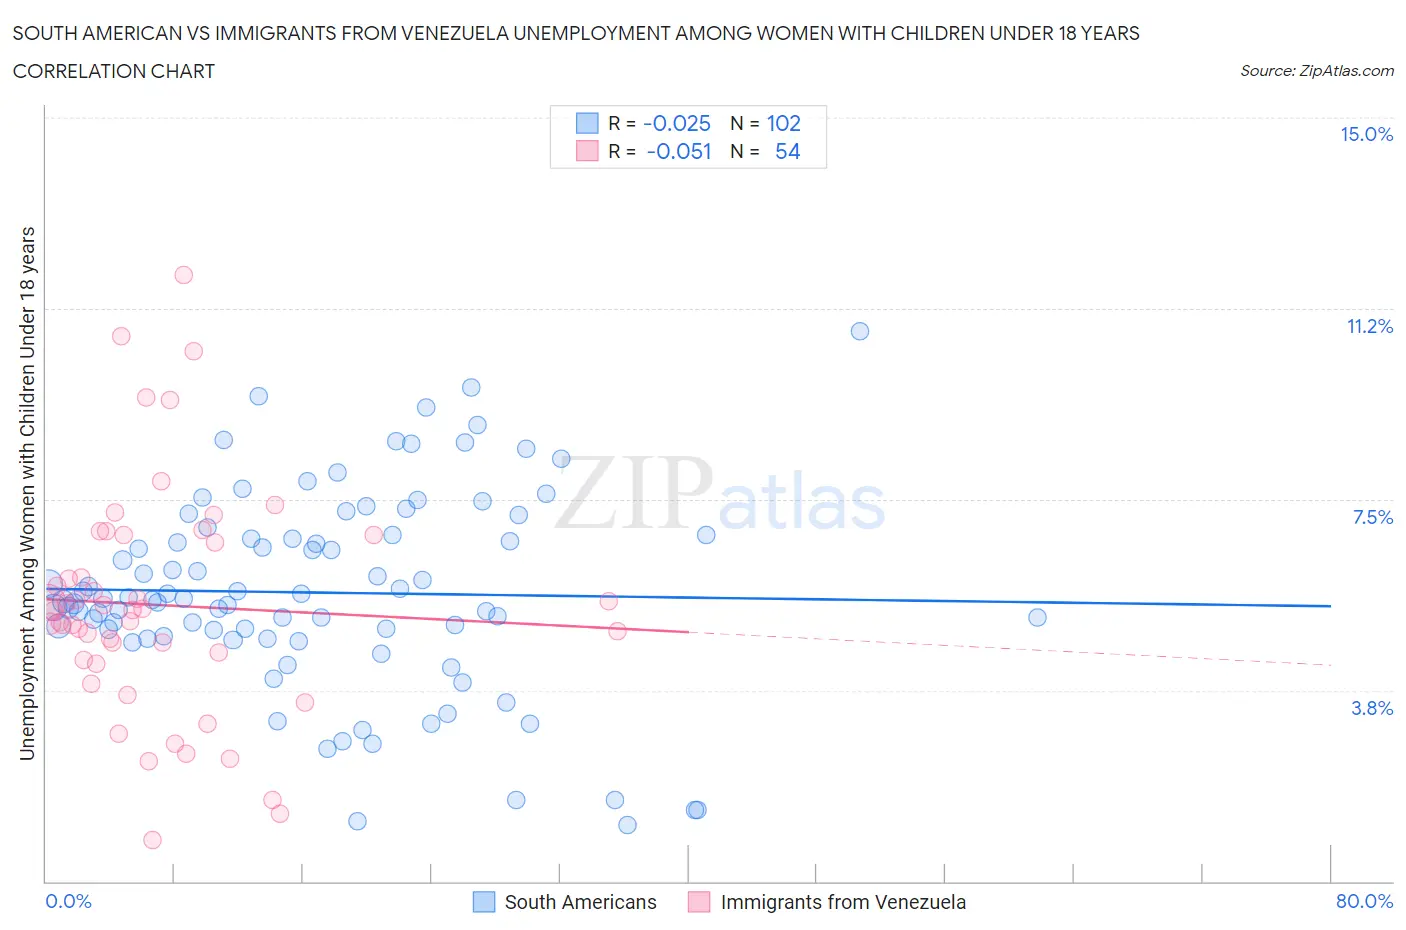 South American vs Immigrants from Venezuela Unemployment Among Women with Children Under 18 years